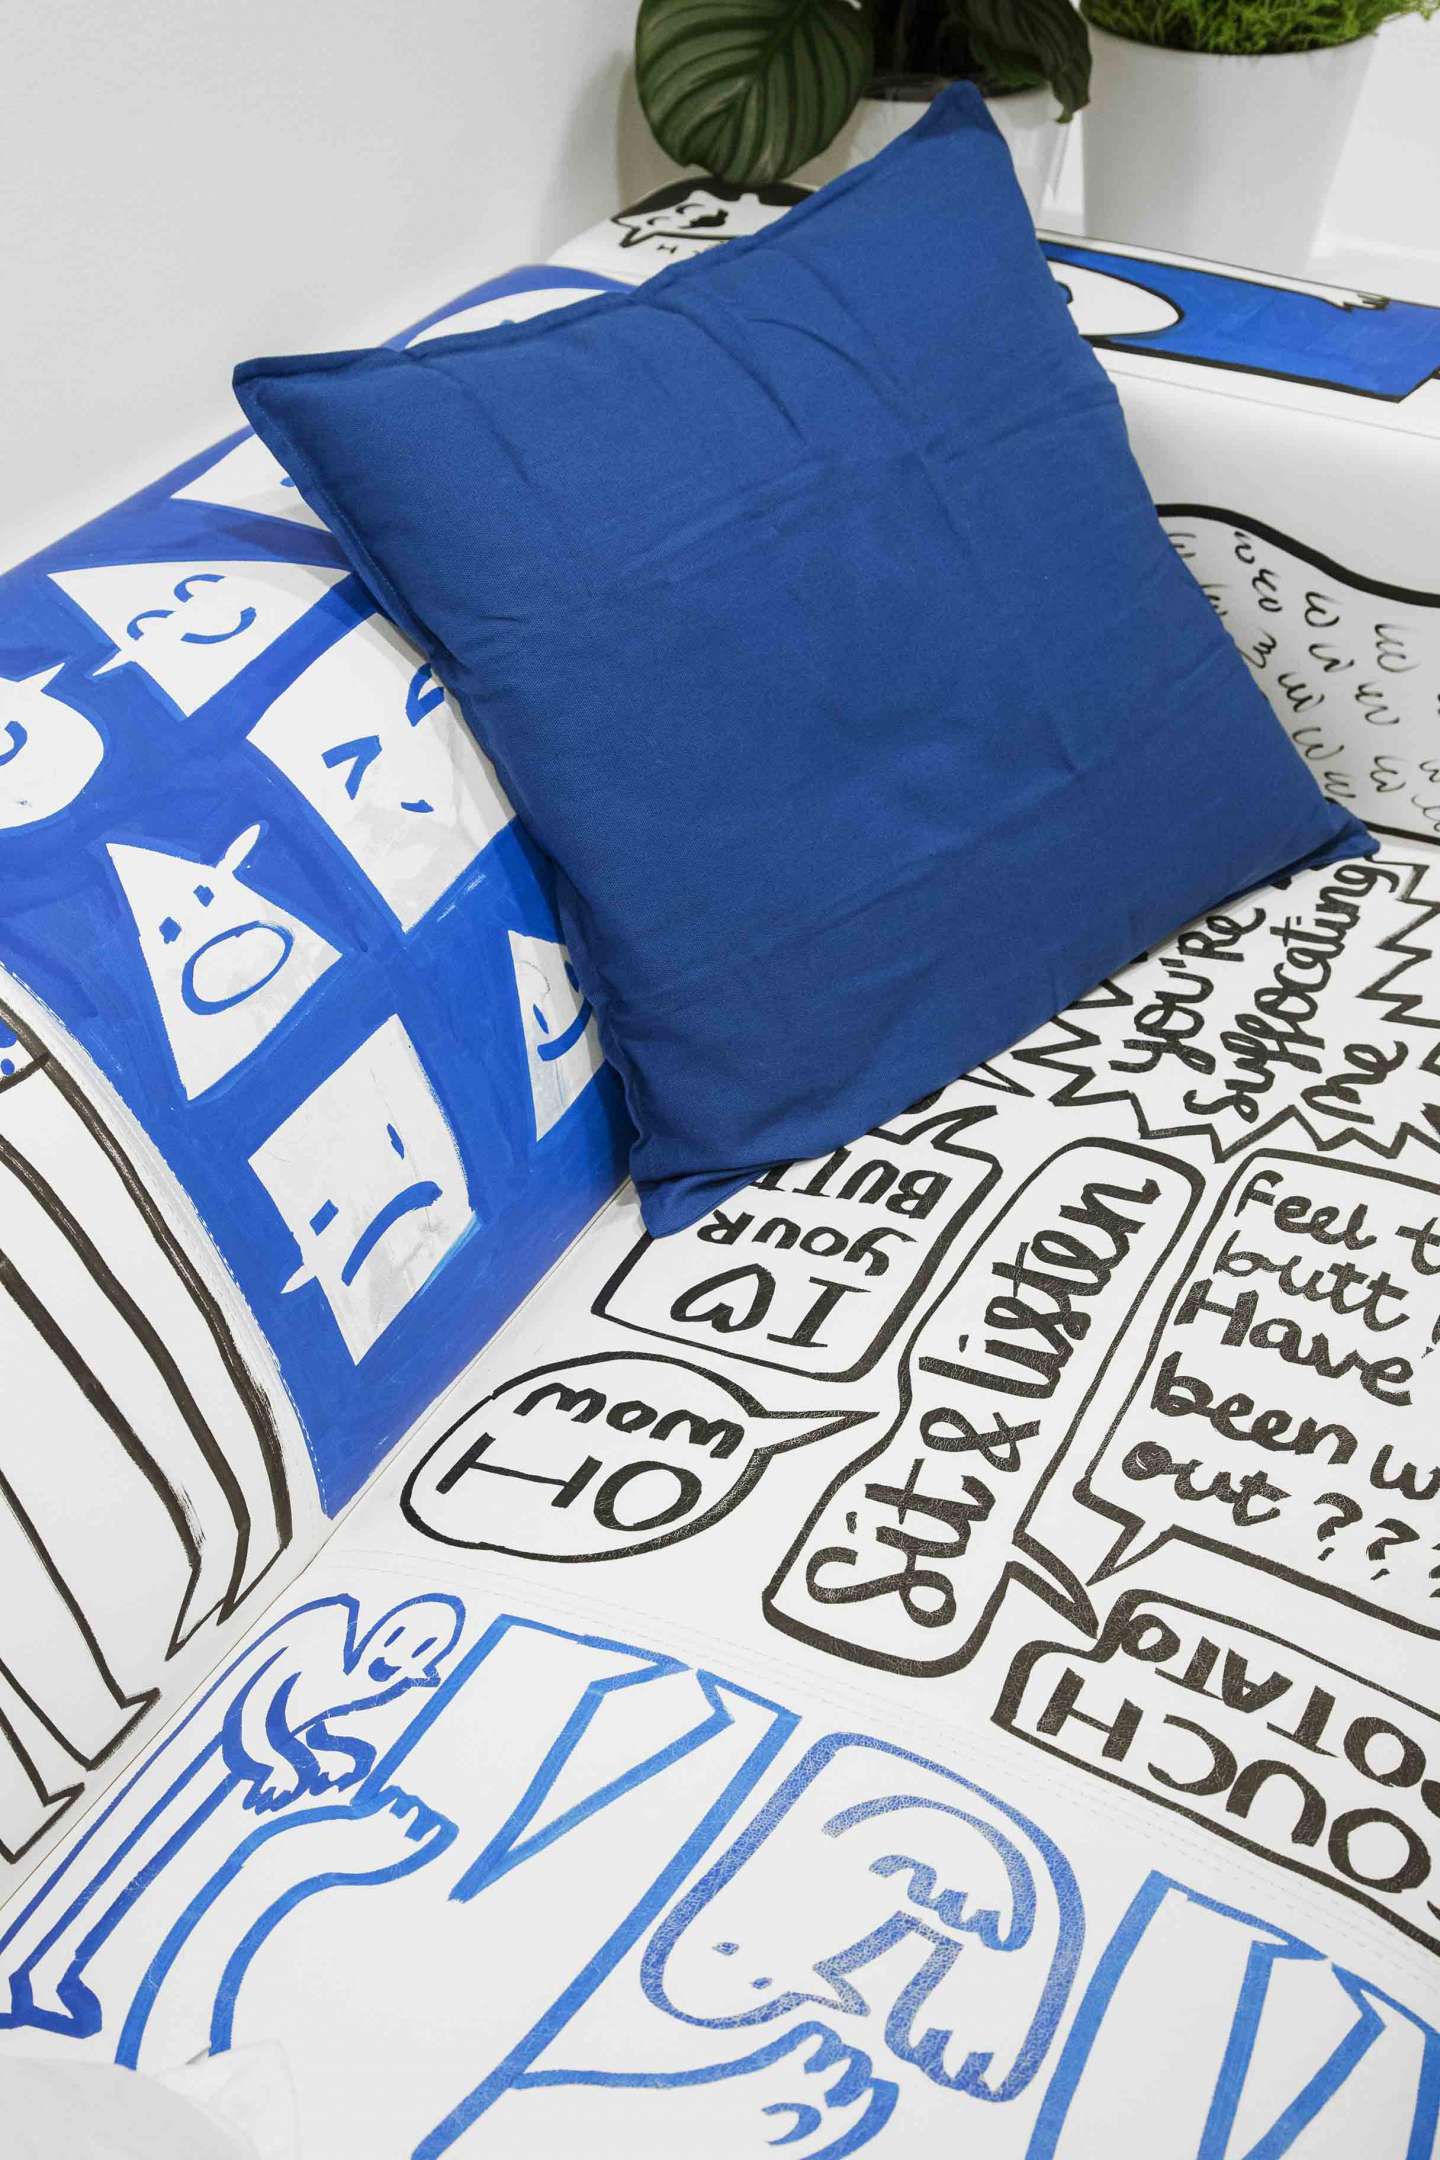 Assembling Reality - This is Amit X IKEA x Colette 